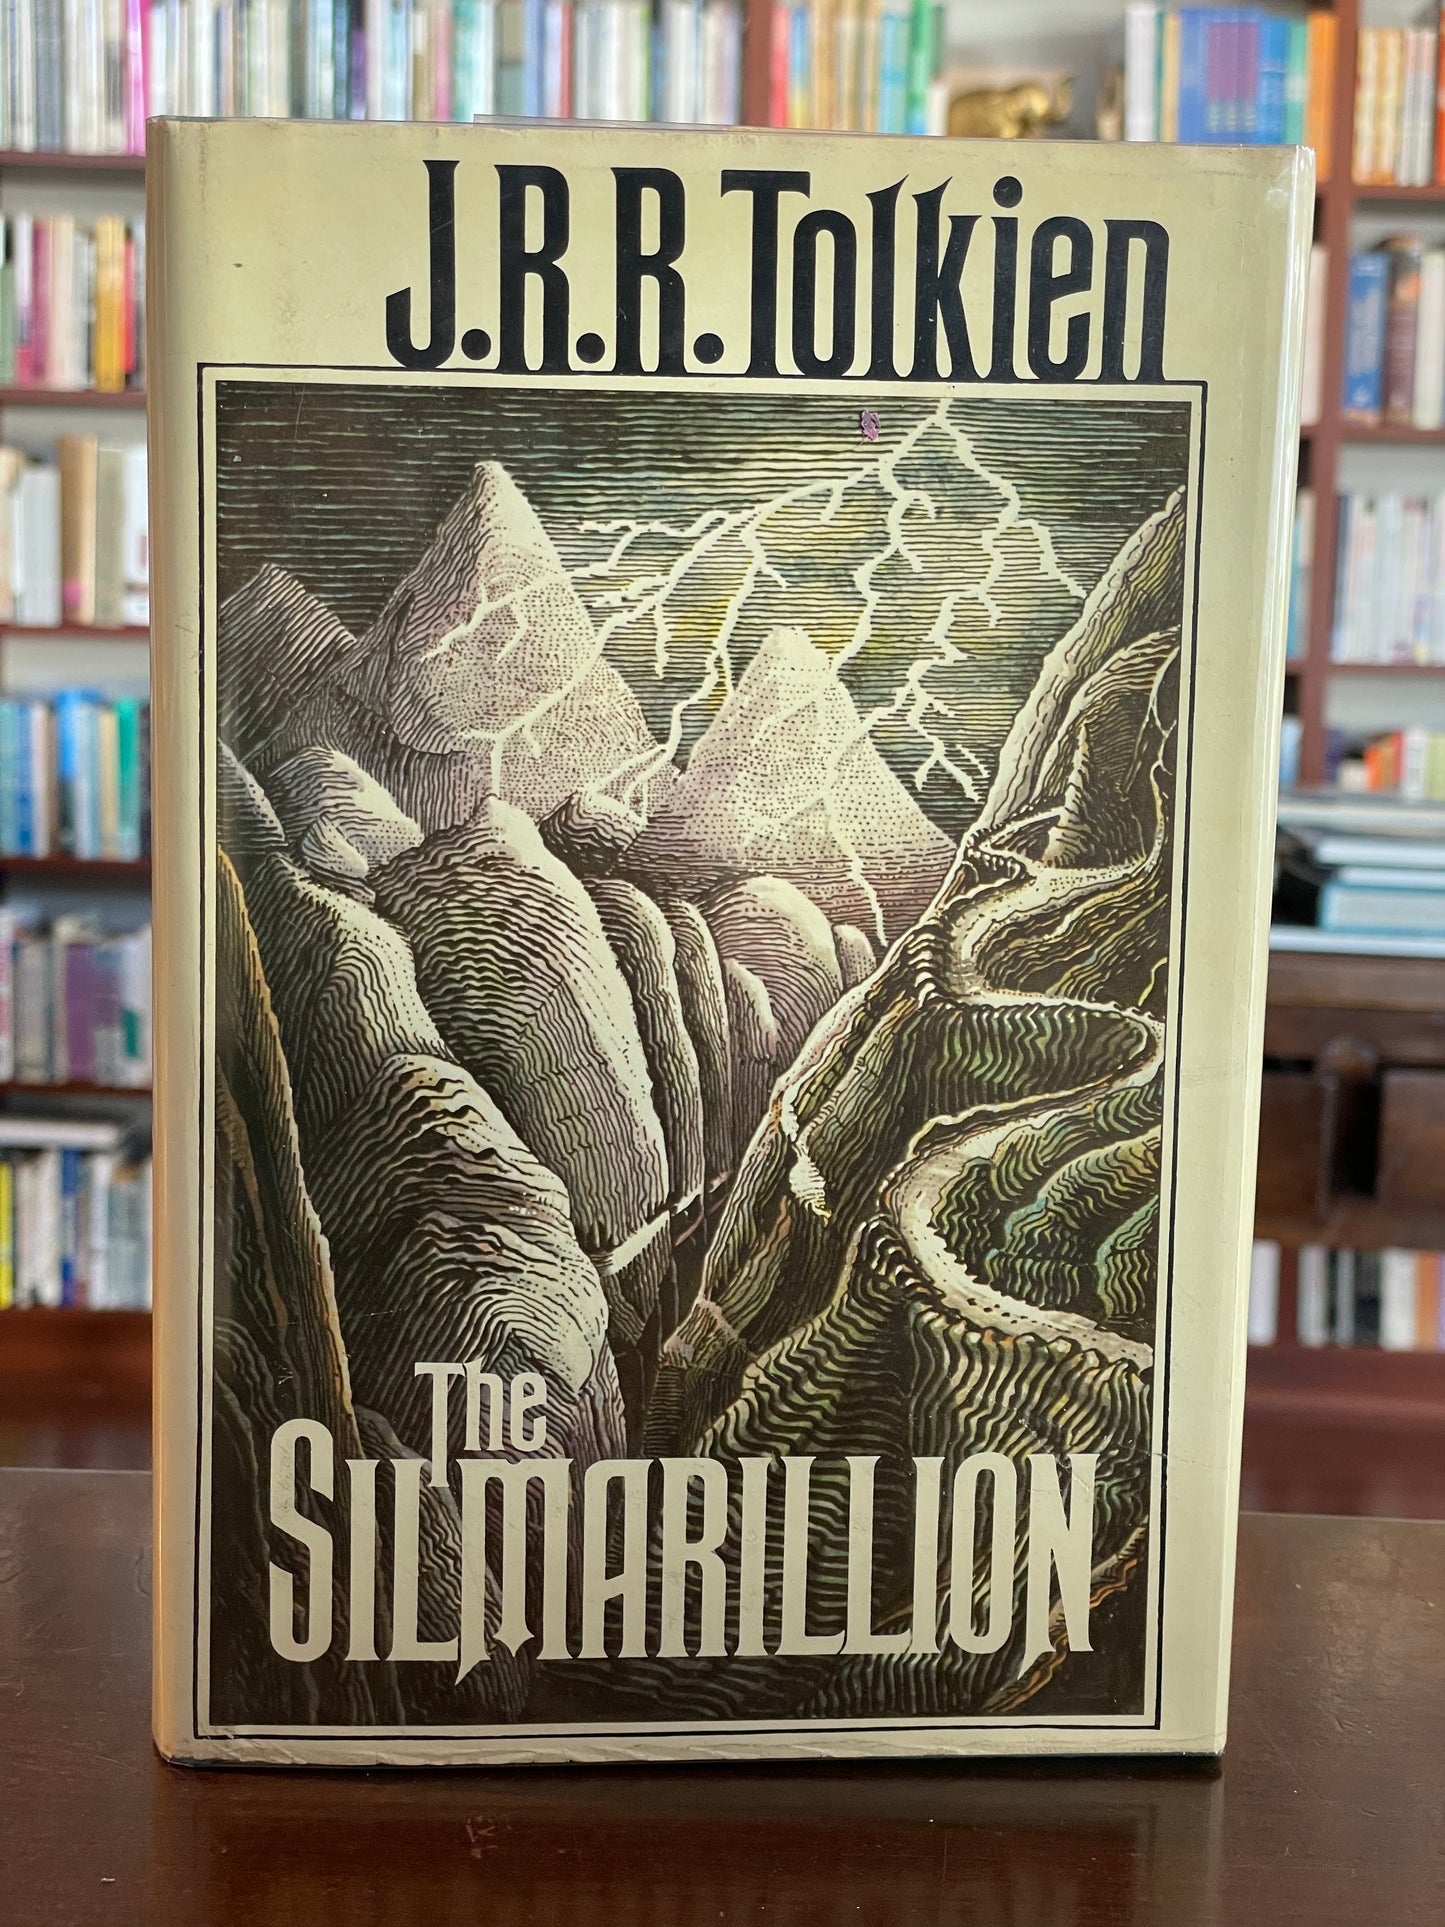 The Silmarillion by J.R.R Tolkien (First Edition)